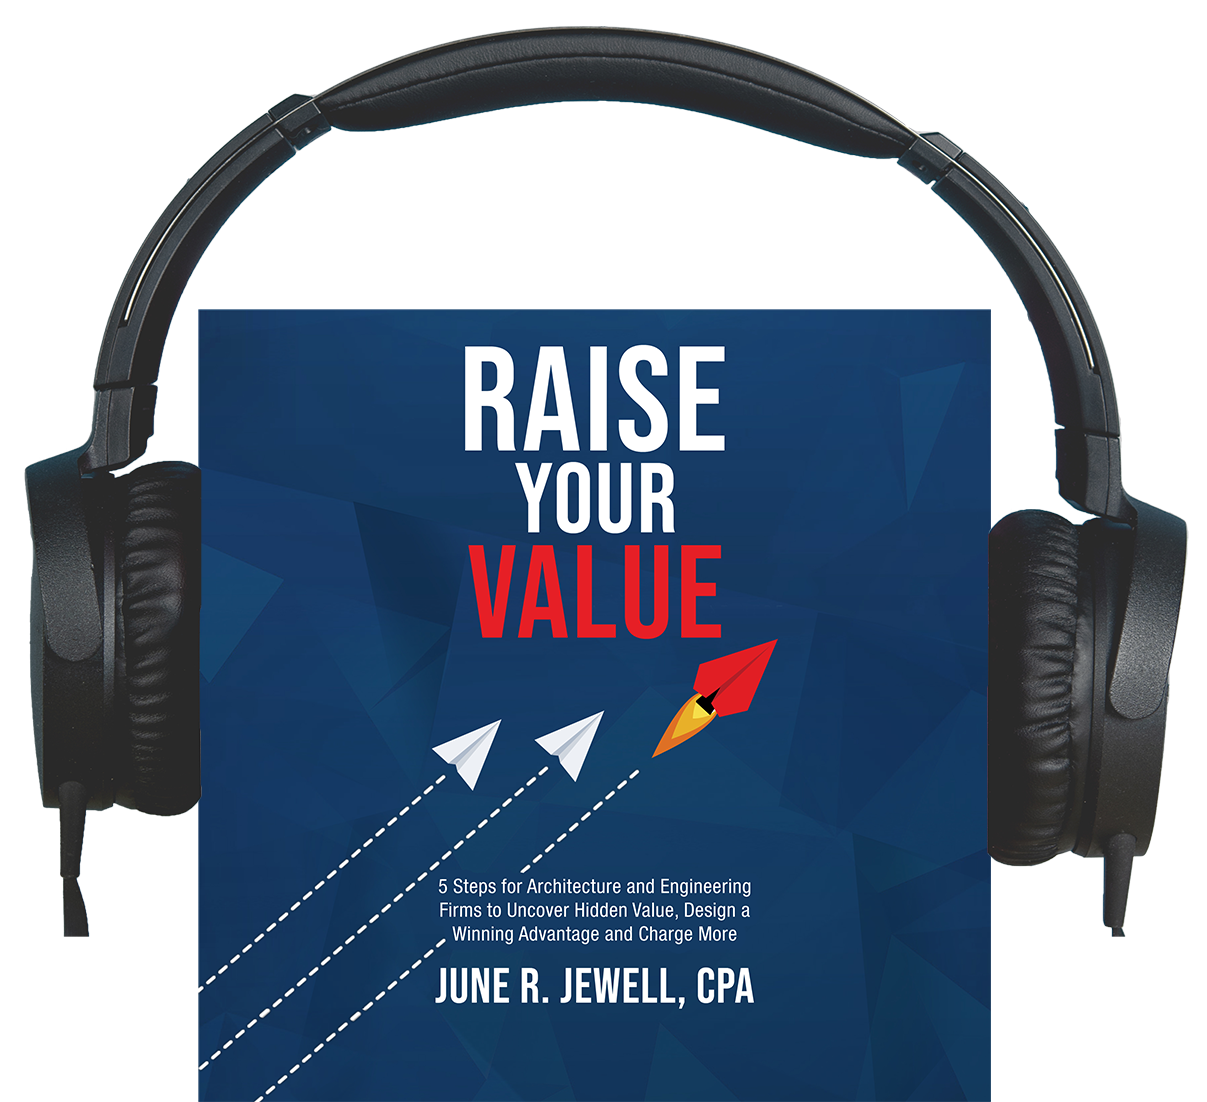 RAISE Your Value Audiobook Cover Image